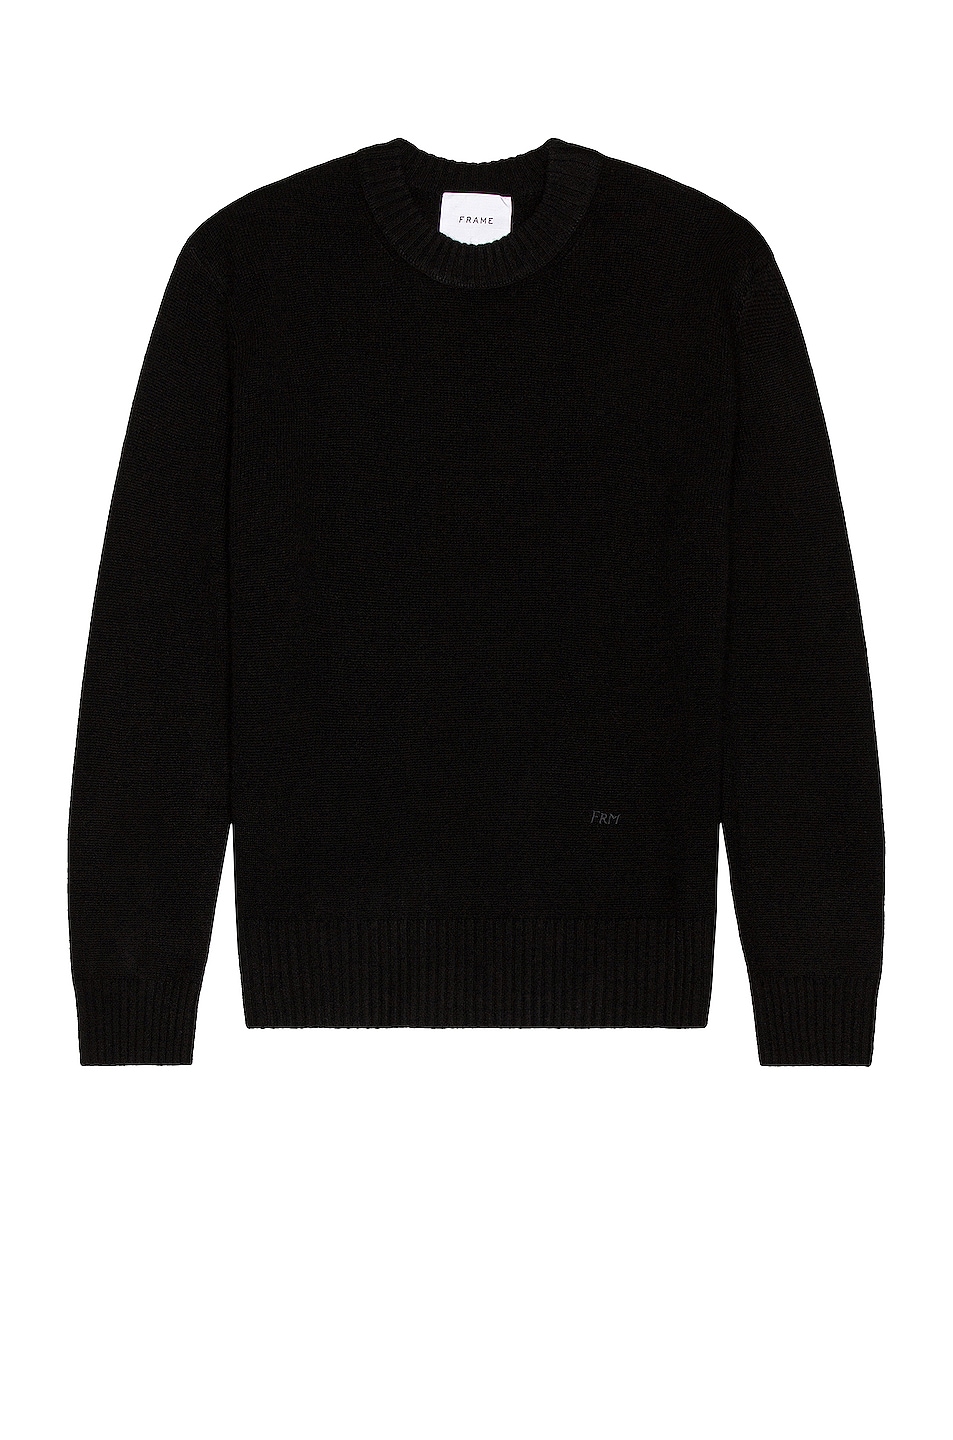 Image 1 of FRAME The Crew Neck Cashmere Sweater in Noir